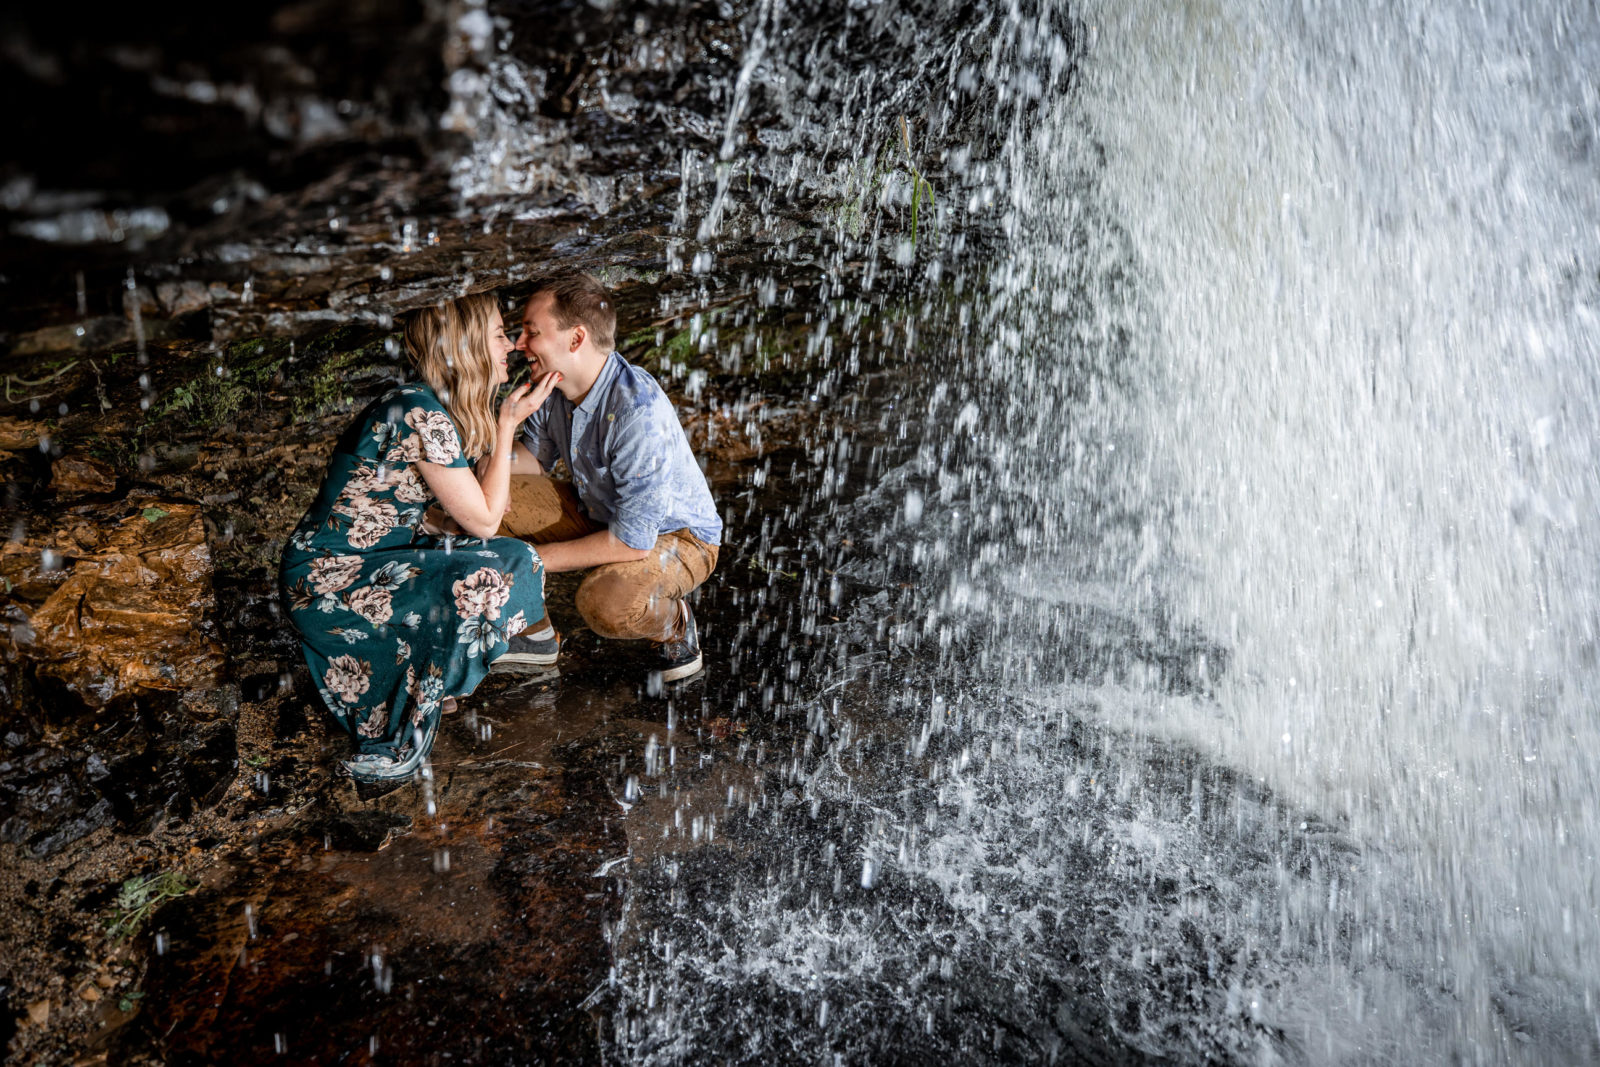 under a waterfall fall engagement